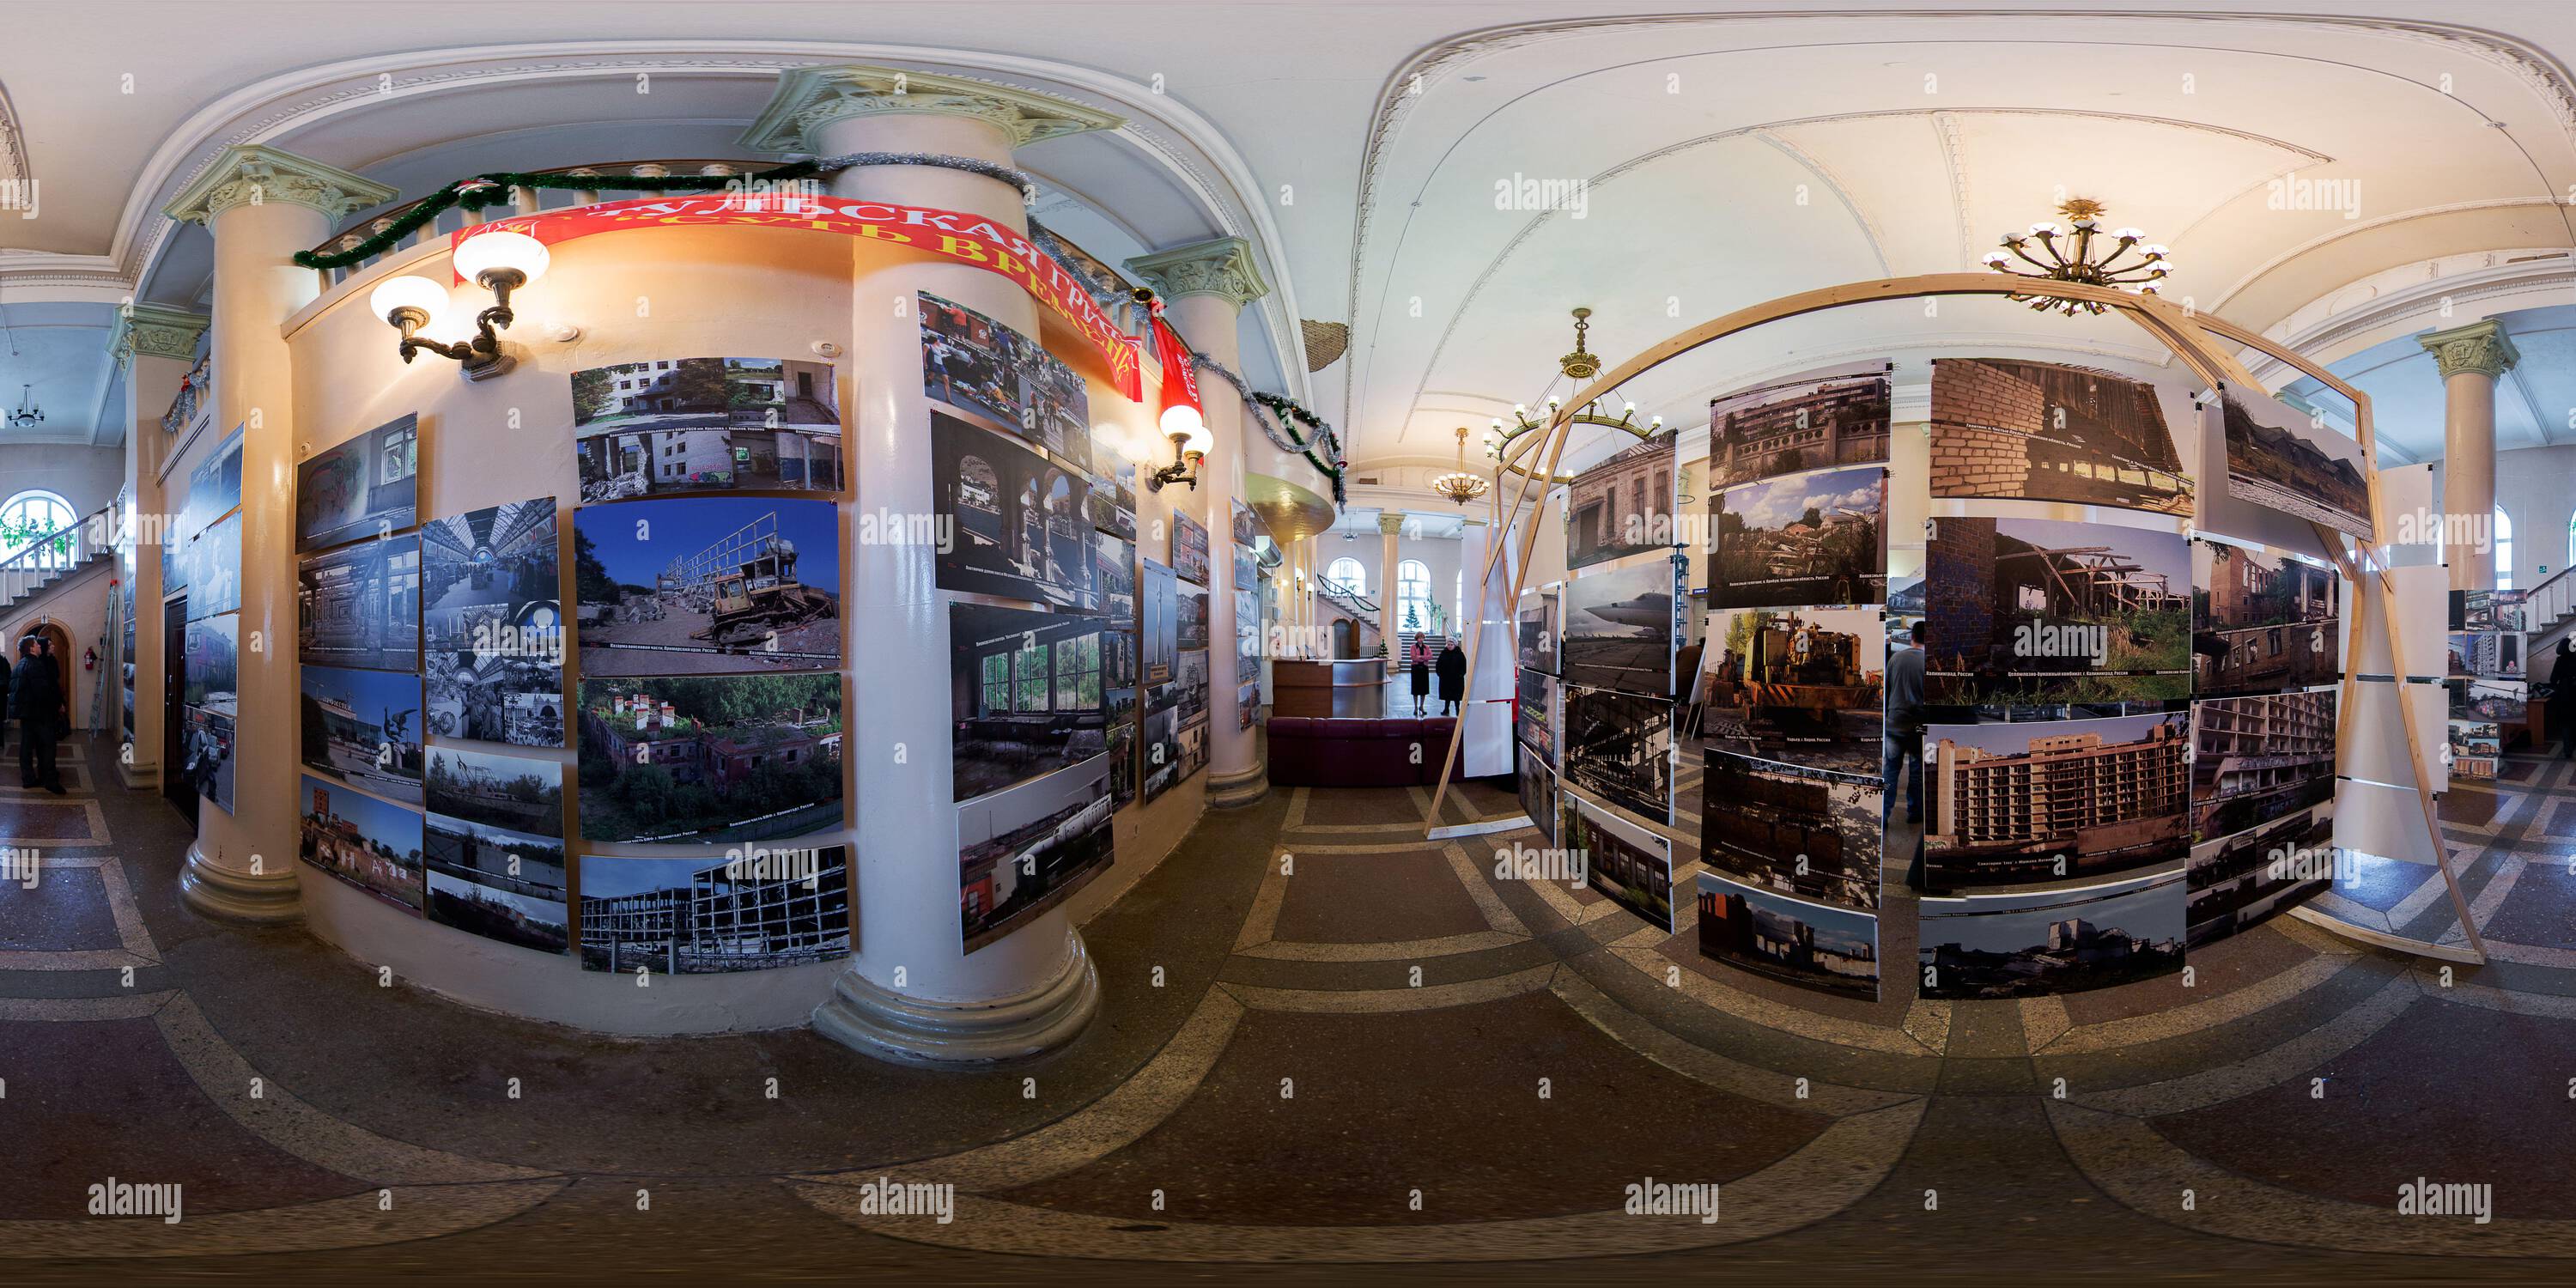 360 degree panoramic view of Seamless full spherical 360 degree panorama in equirectangular projection of indoor photo exhibition named 20 years without USSR in Tula, Russia - Dec